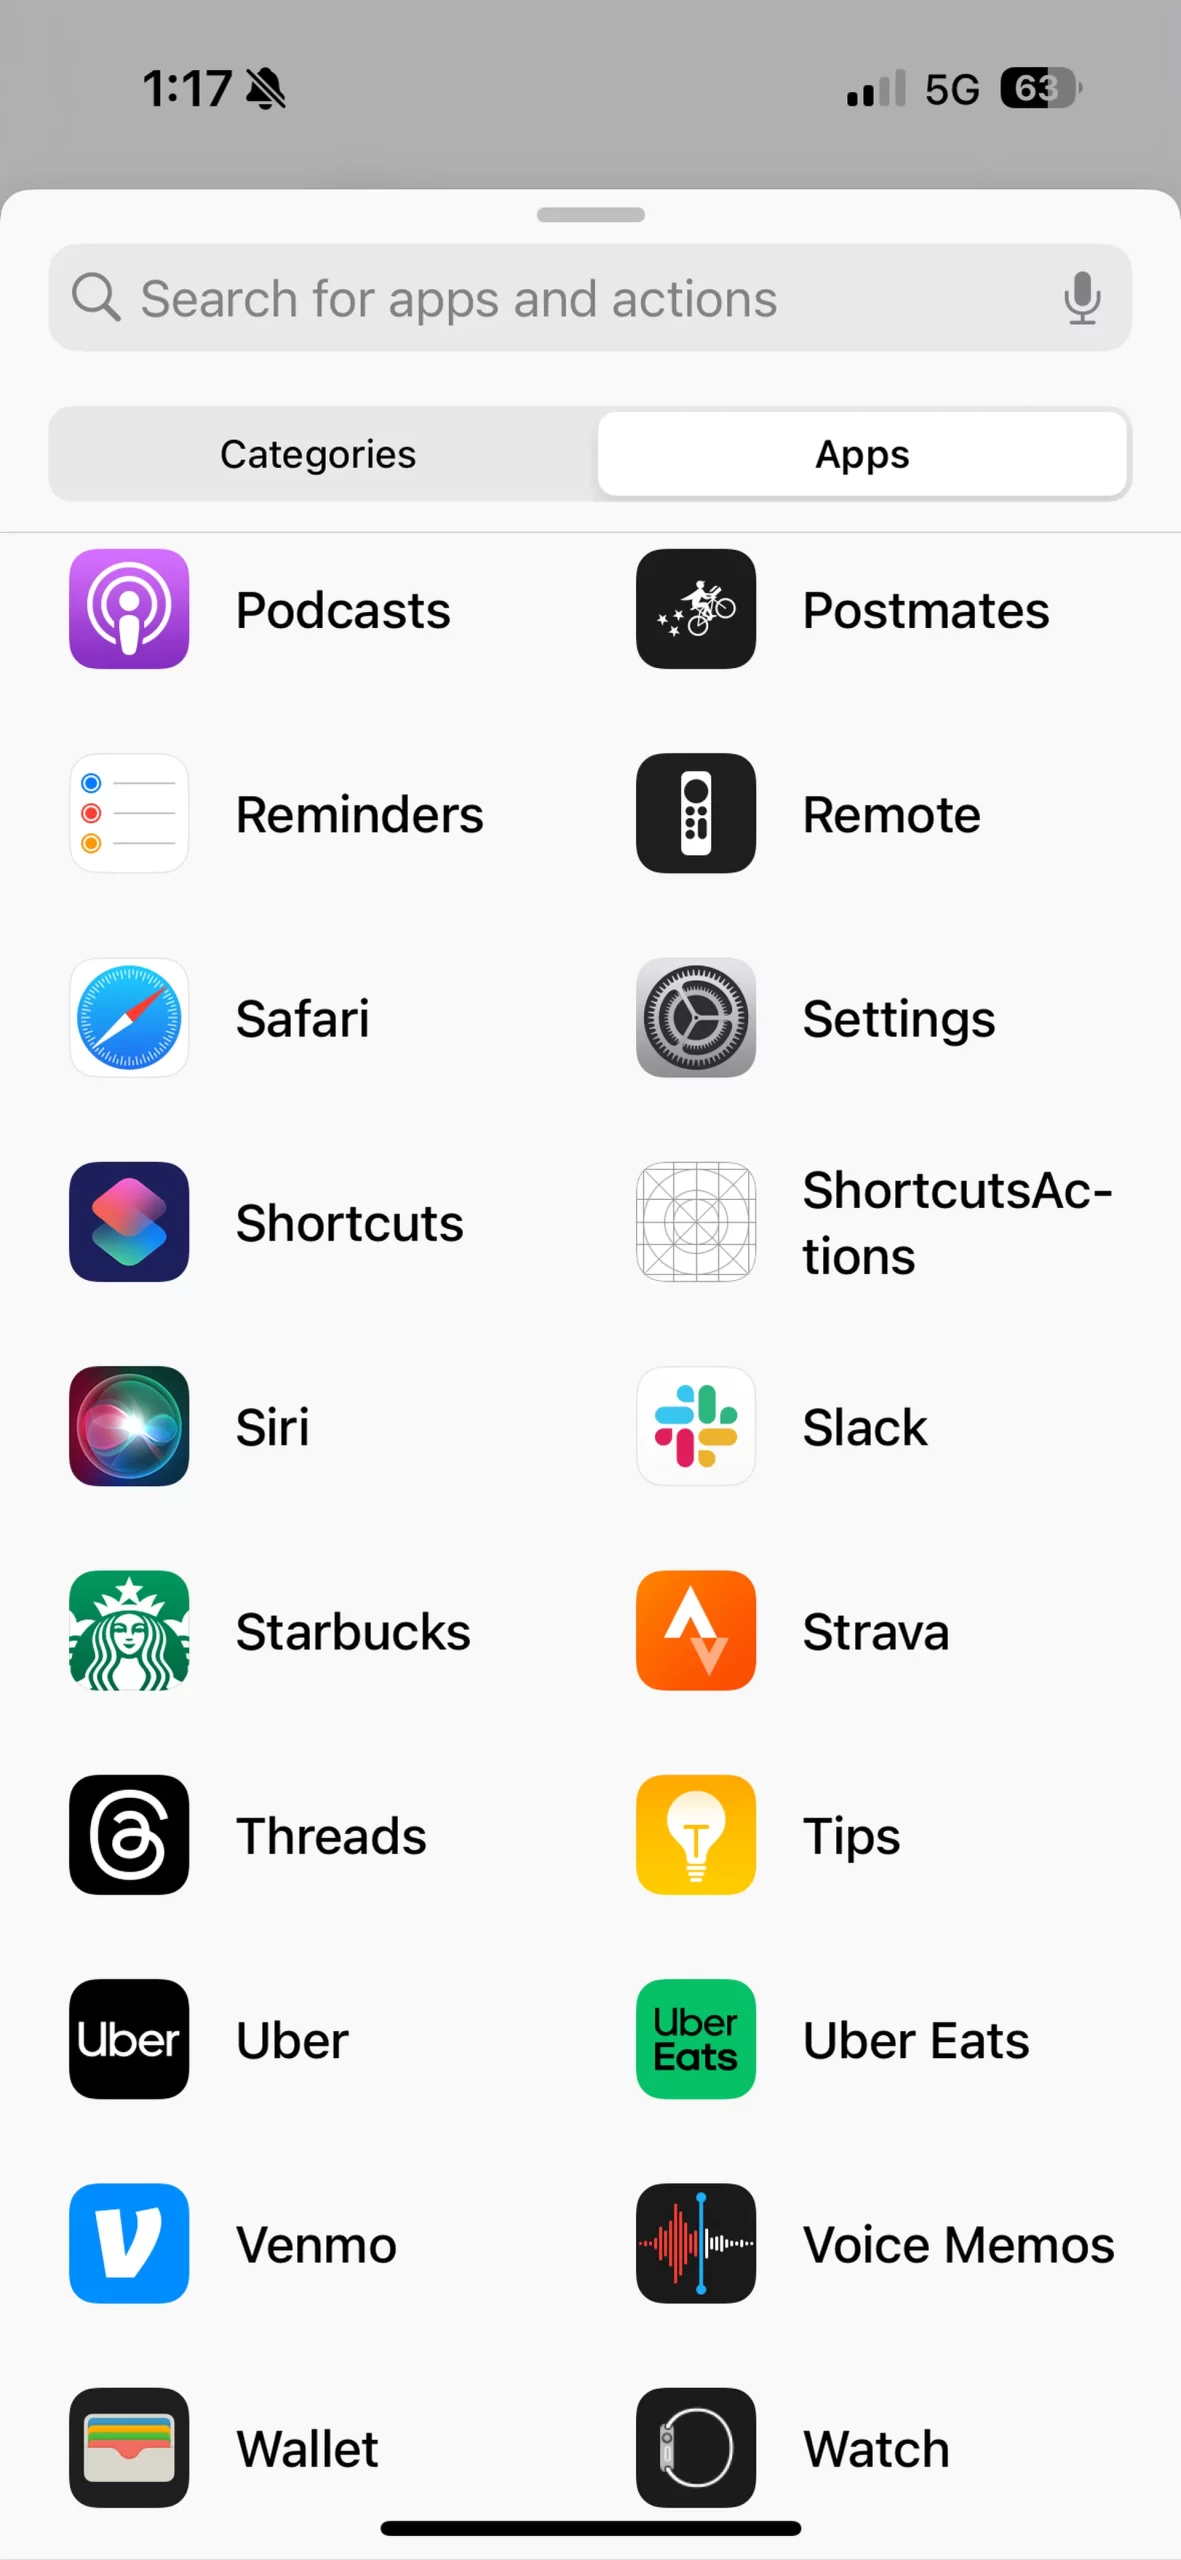 App section